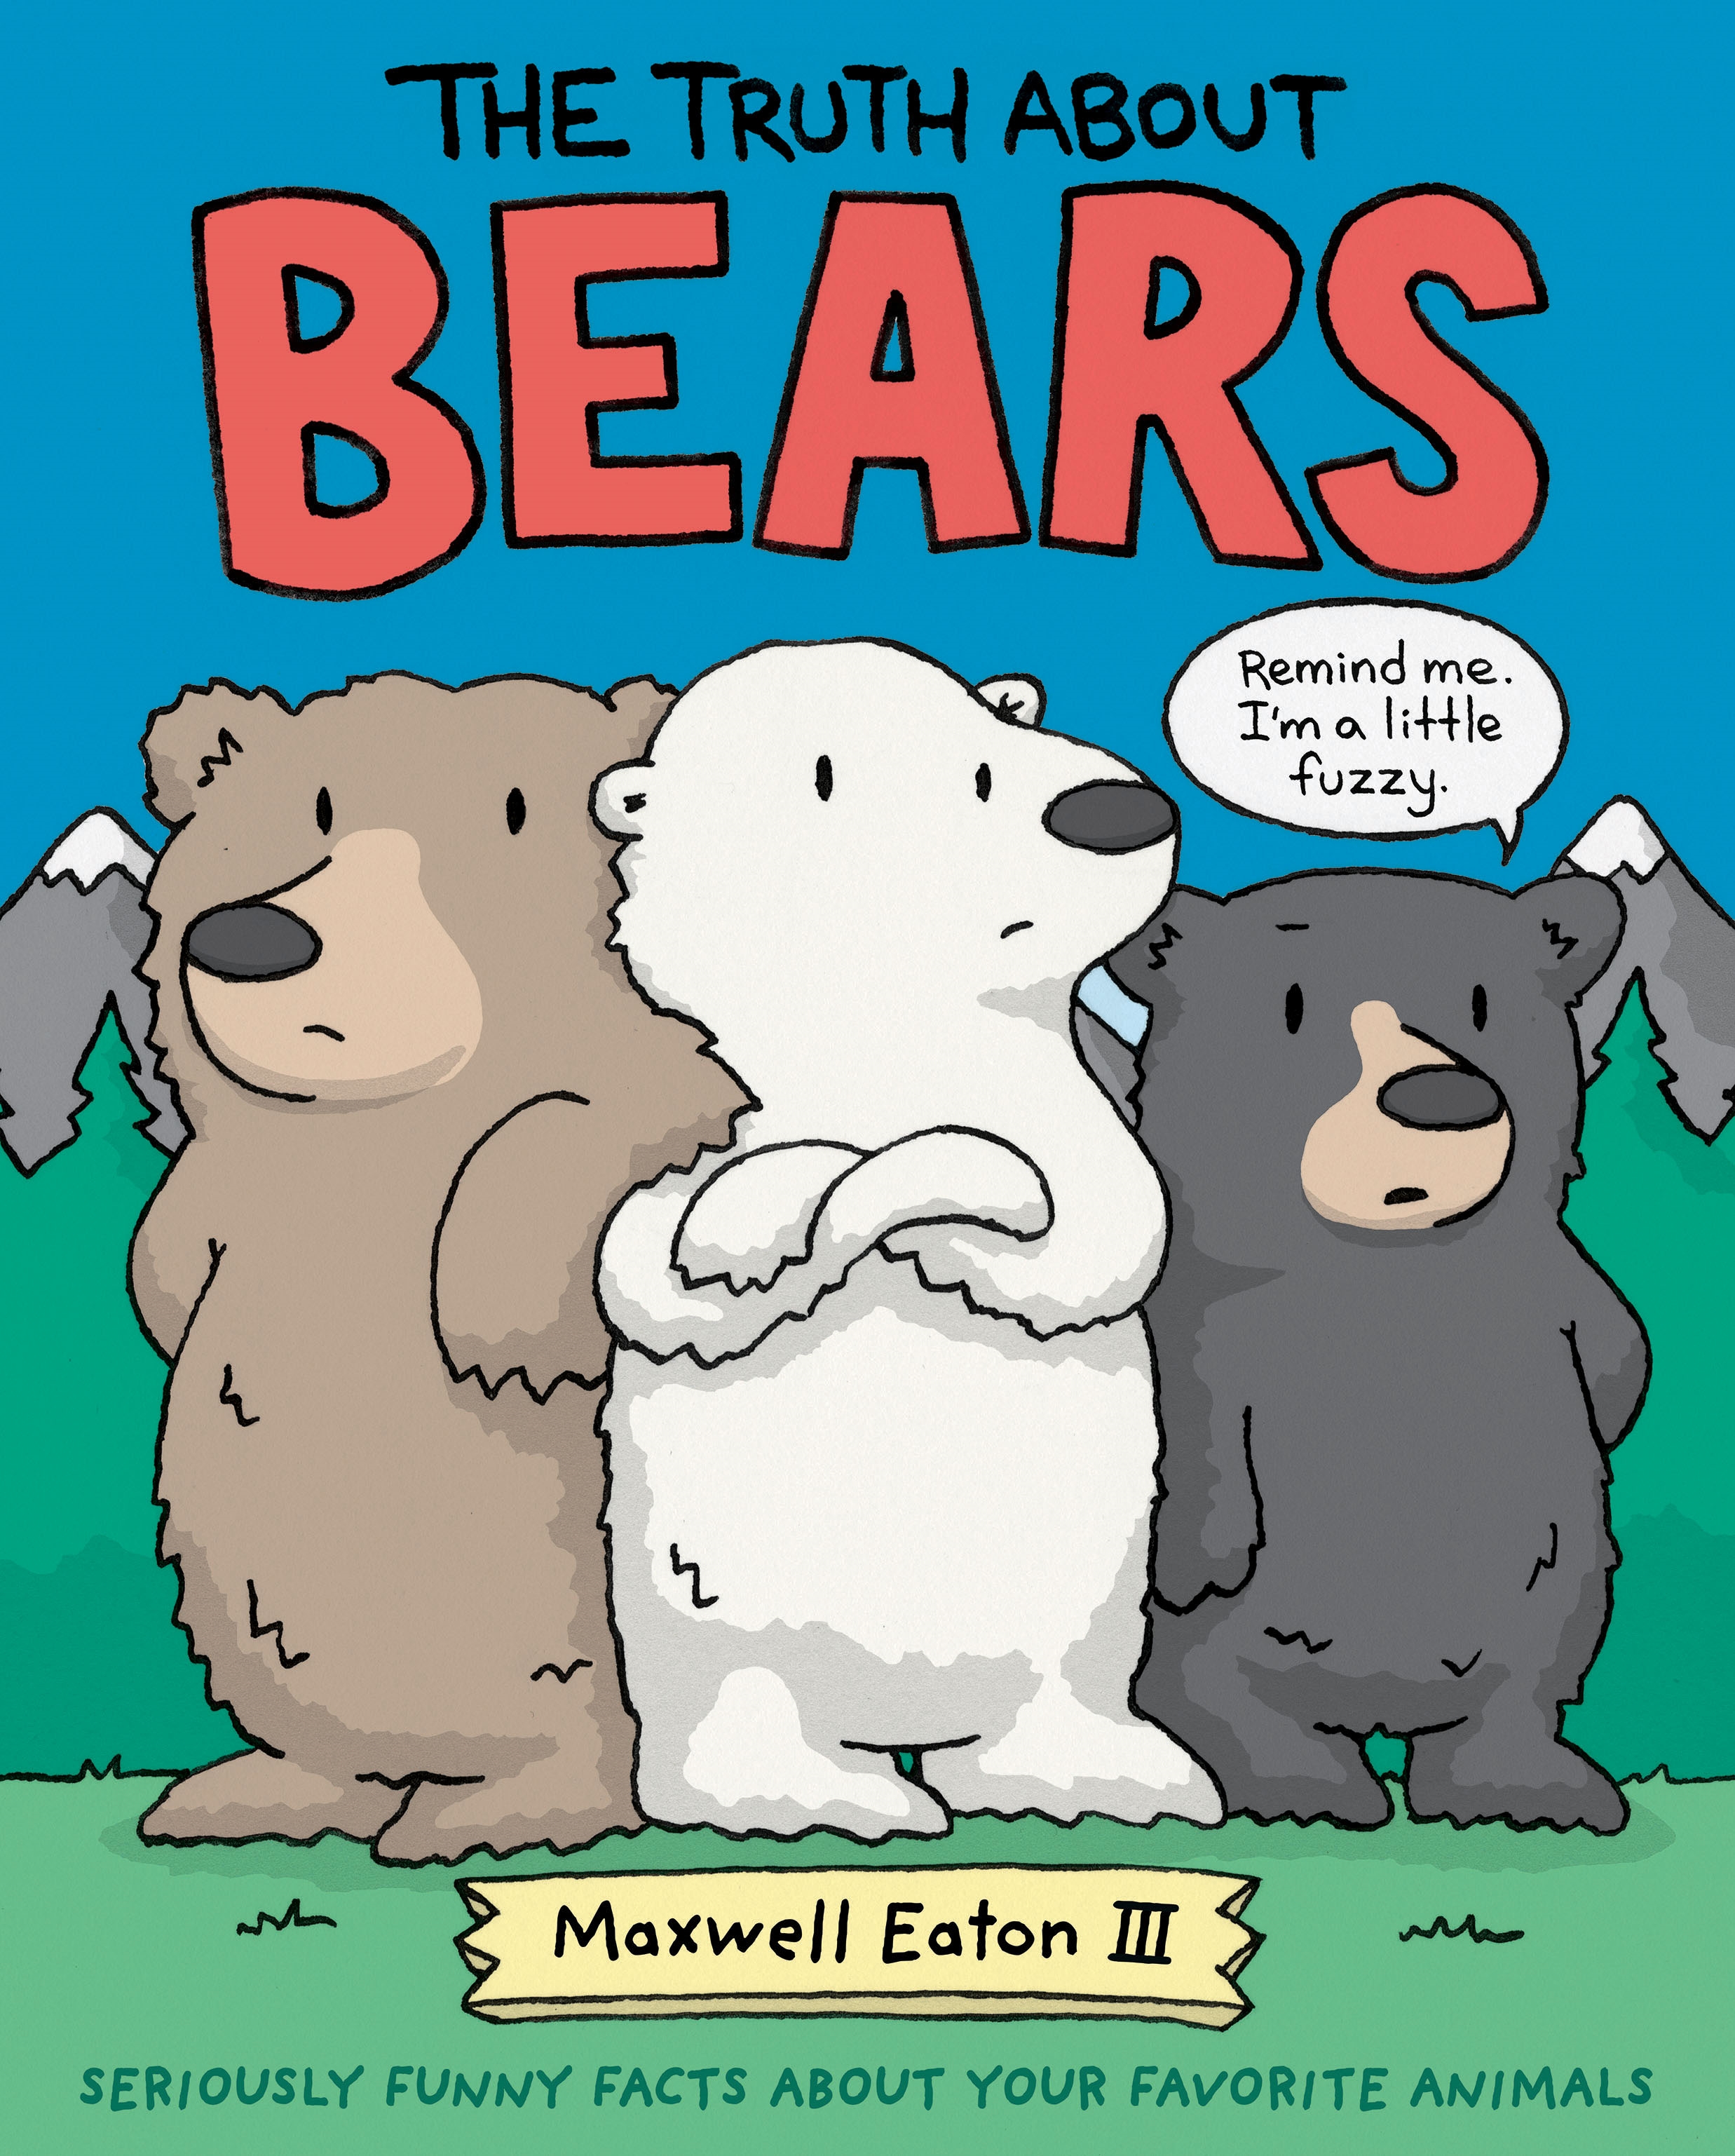 Sunday Story Time with Maxwell Eaton III (Author/Illustrator of The Truth About Bears & The Truth About Hippos)